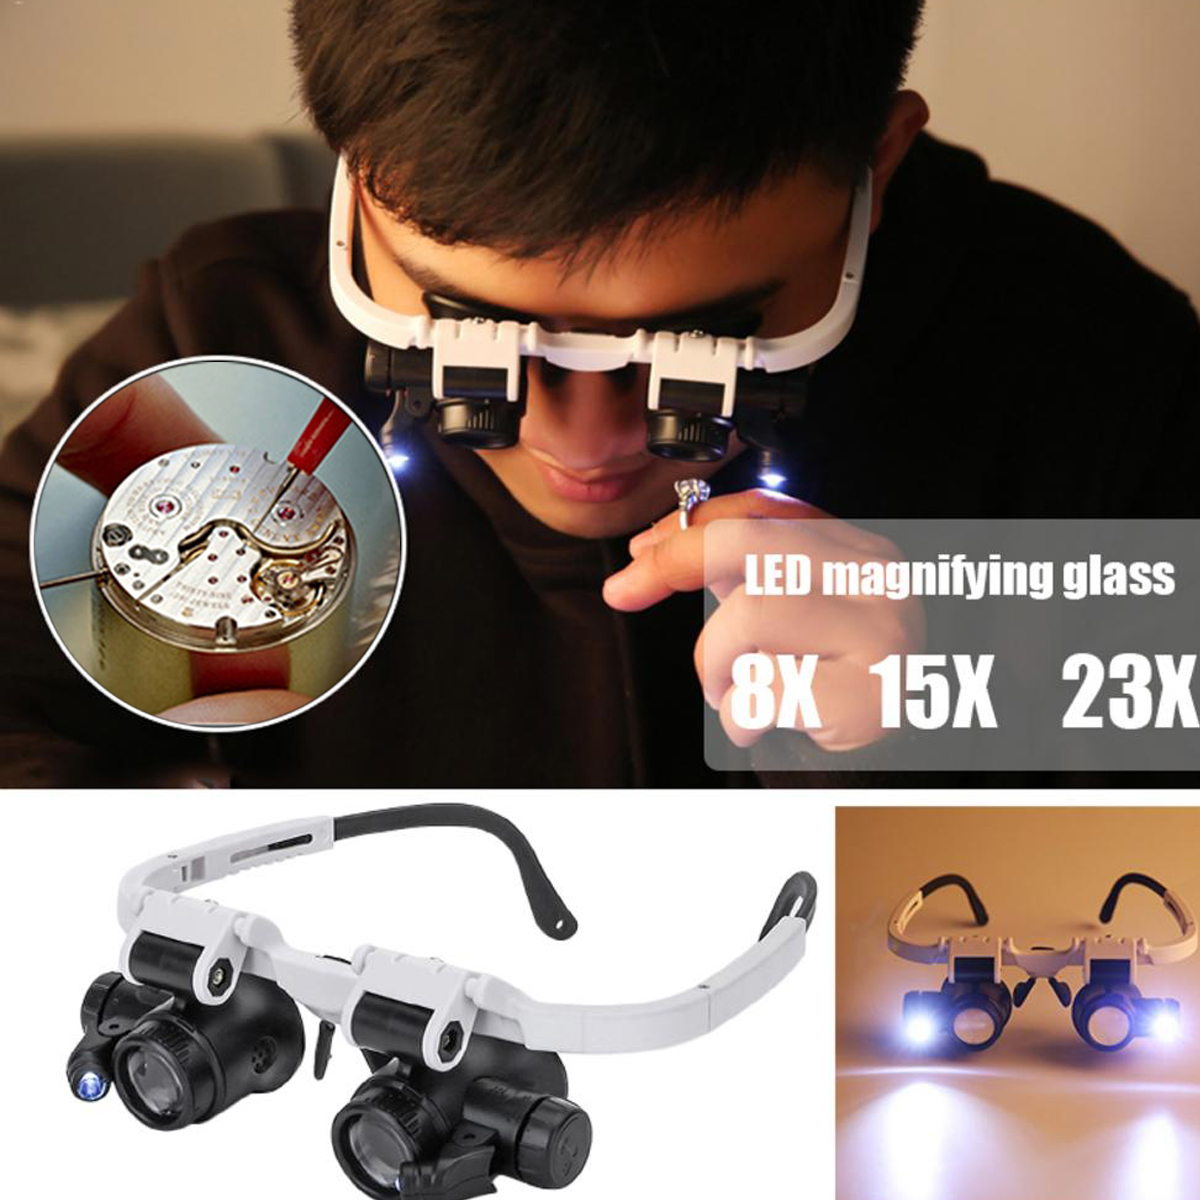 Headband-Head-Mounted-Repair-LED-Lamp-Light-Magnifying-Glass-Magnifier-Loupe-1623754-2